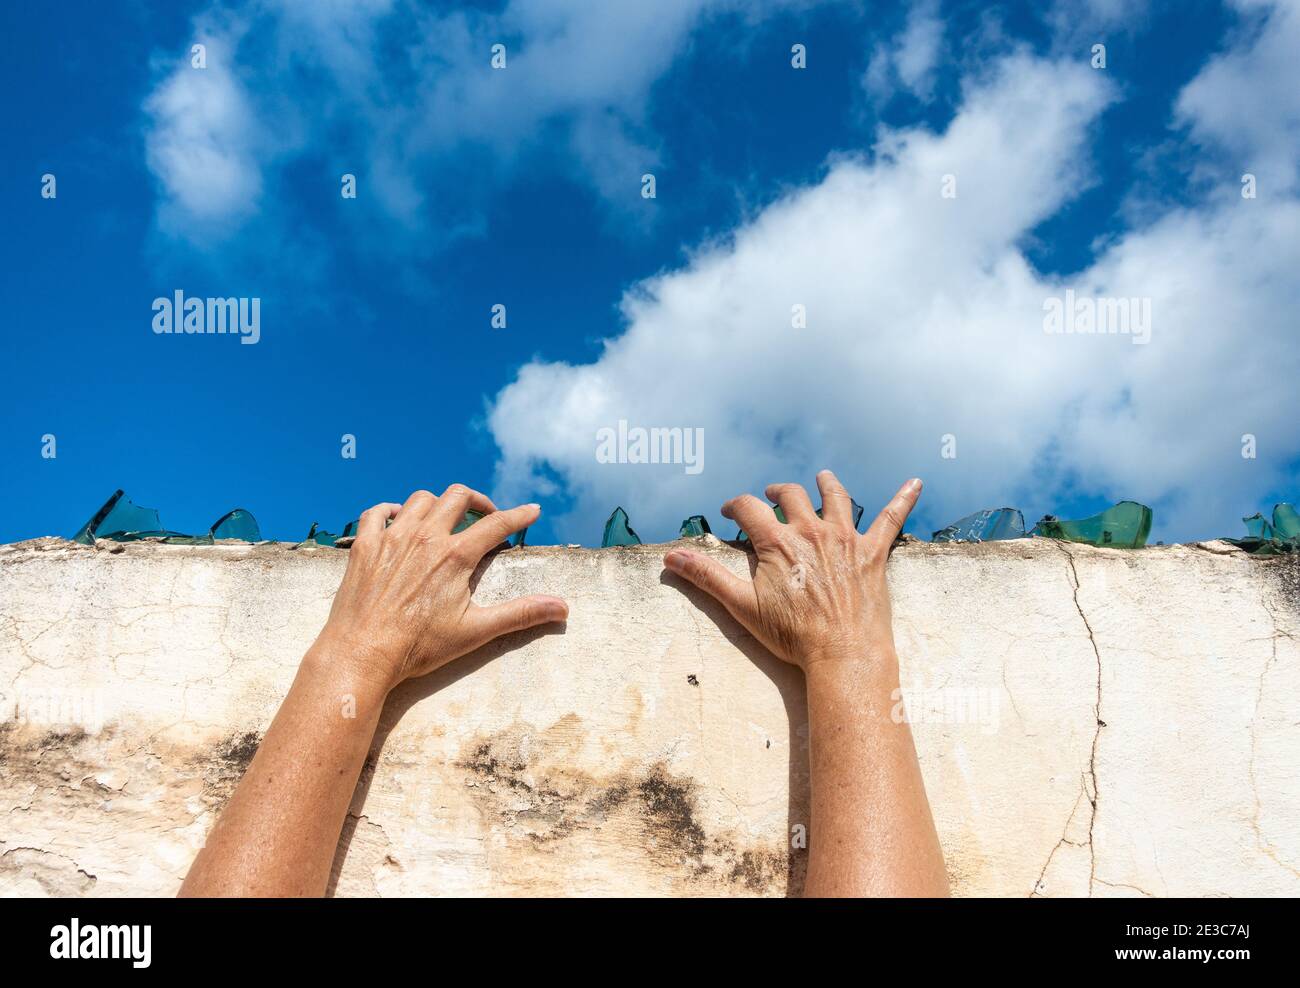 Hands on broken glass on top of wall with blue sky copy space. Escaping, trapped, prison, lockdown... concept. Stock Photo